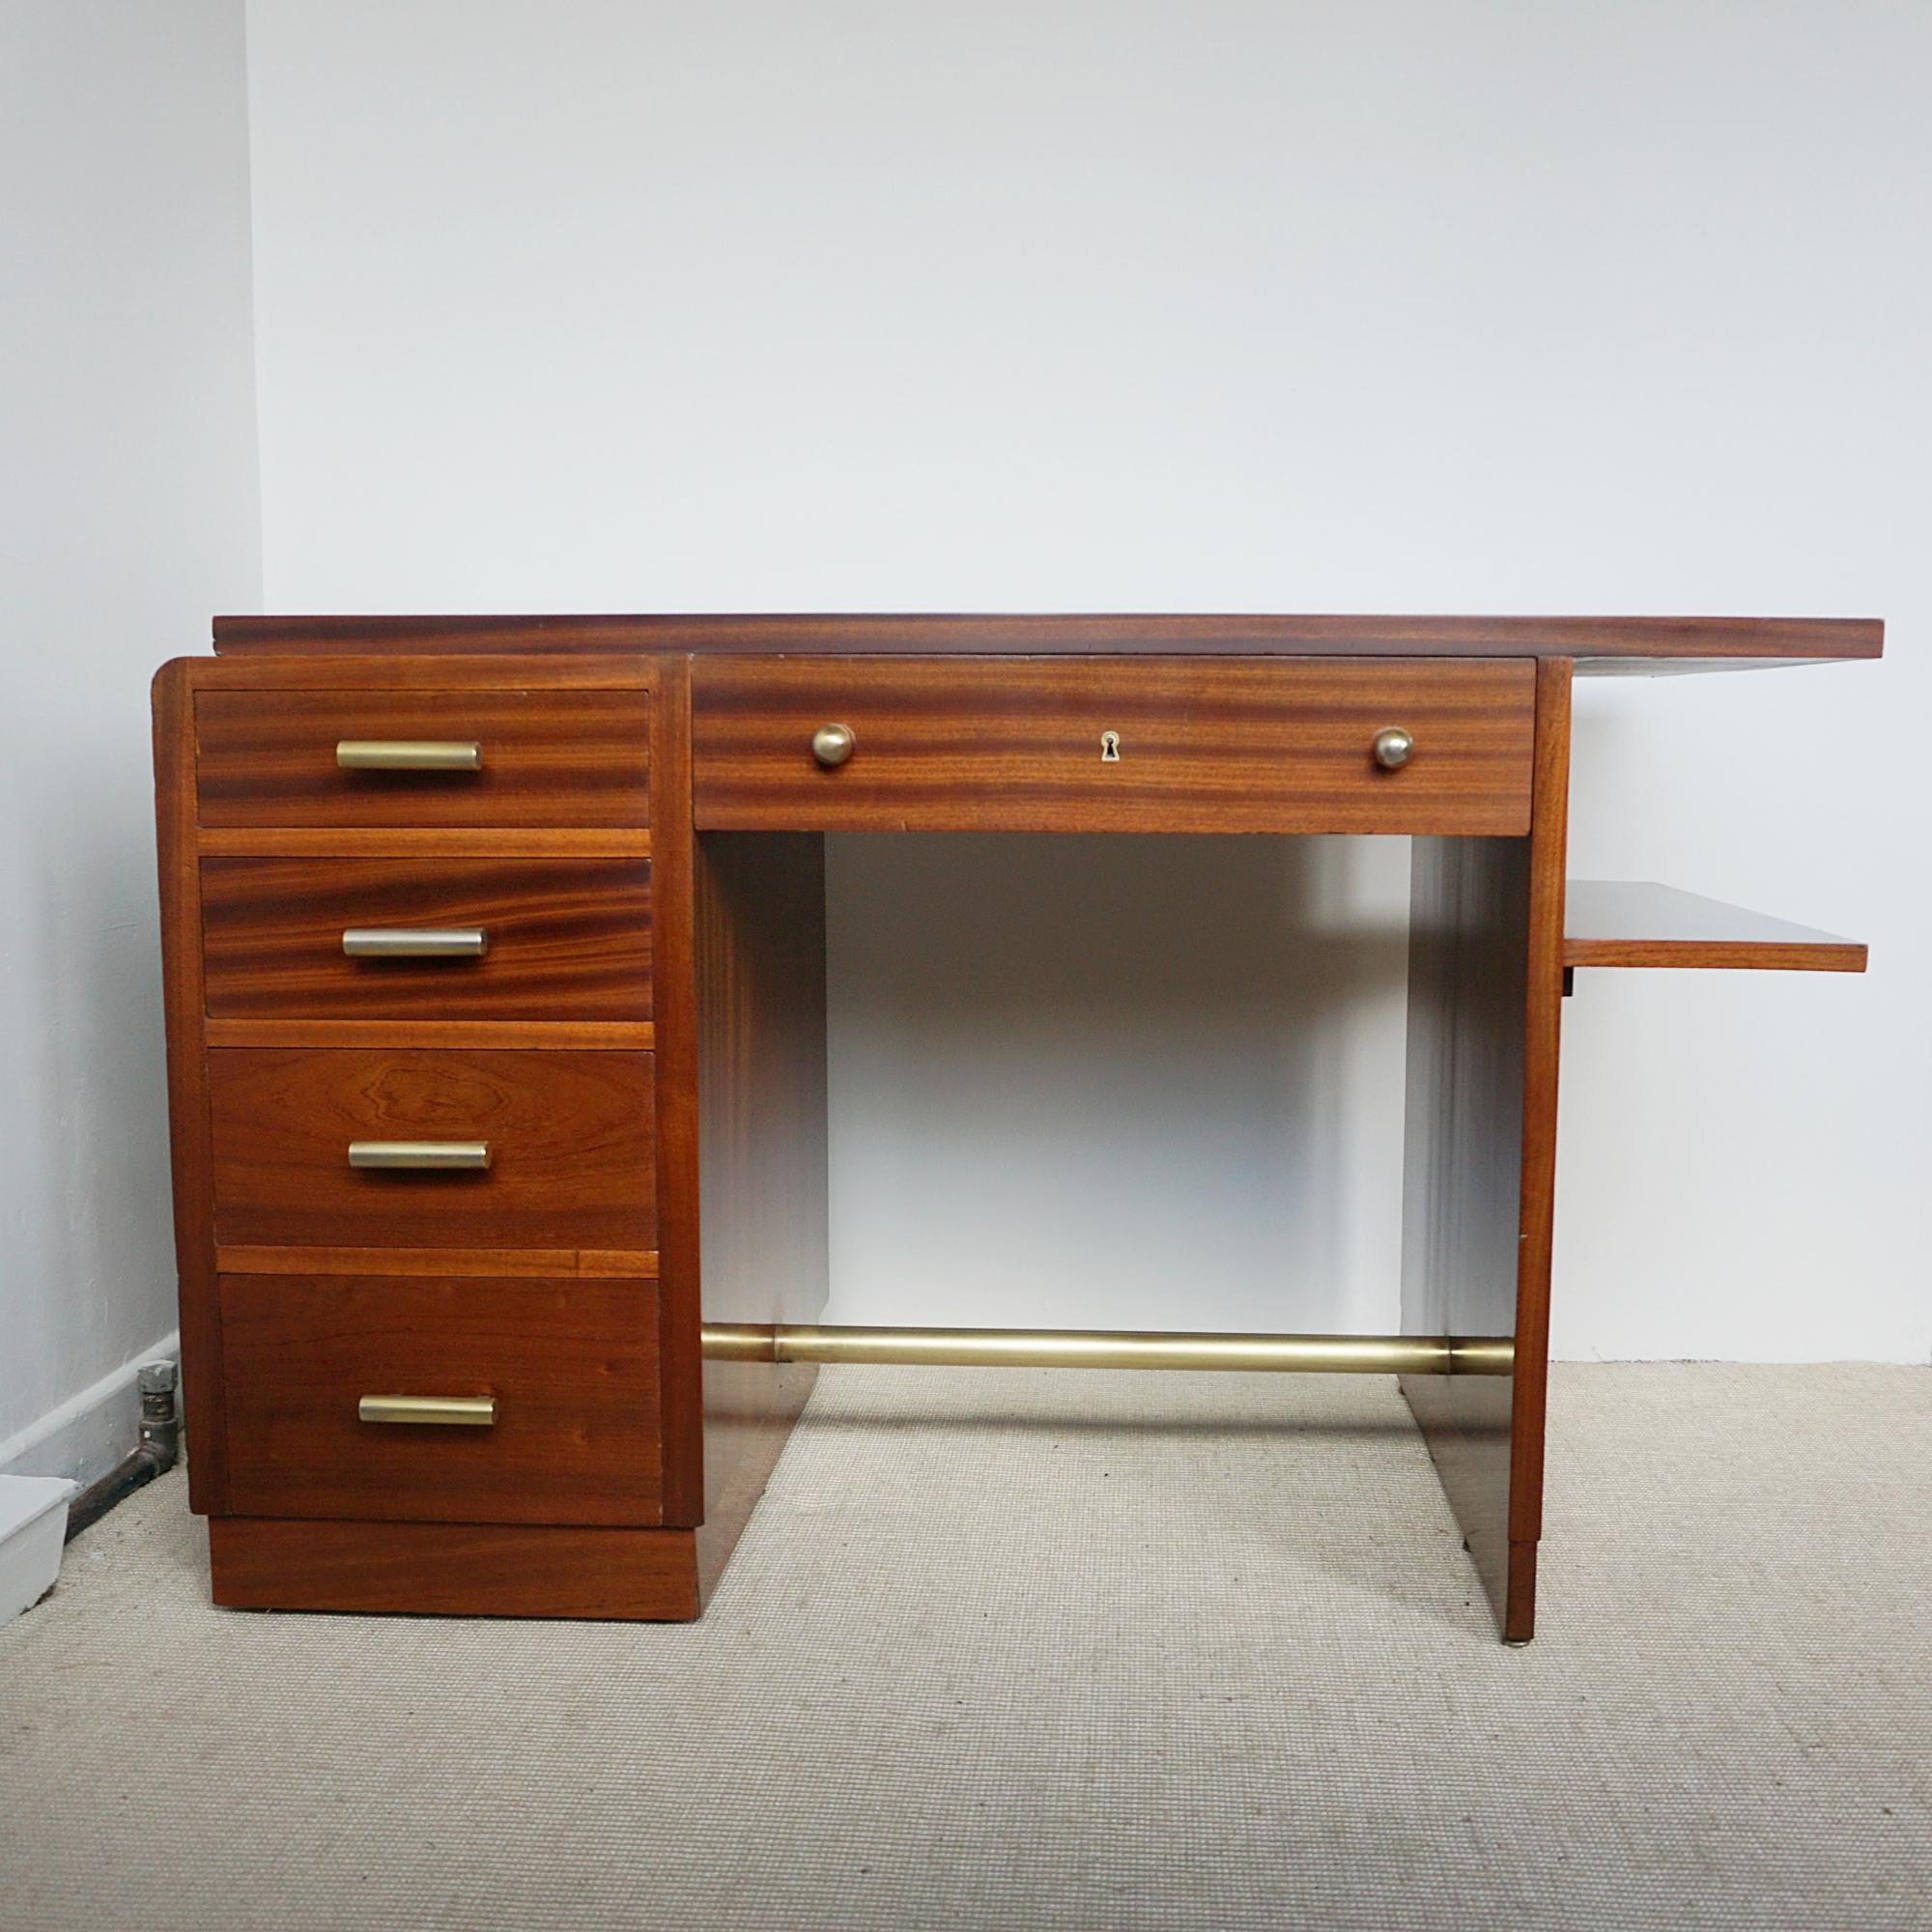 An Art Deco Flame Mahogany Desk. Five pull out drawers with an open bookshelf to side. Original brass handles and stretcher. Wear consistant with age.

Dimensions: H 76cm W 120cm D 64cm 

Origin: English

Date: Circa 1935

Item Number: 2003244

All